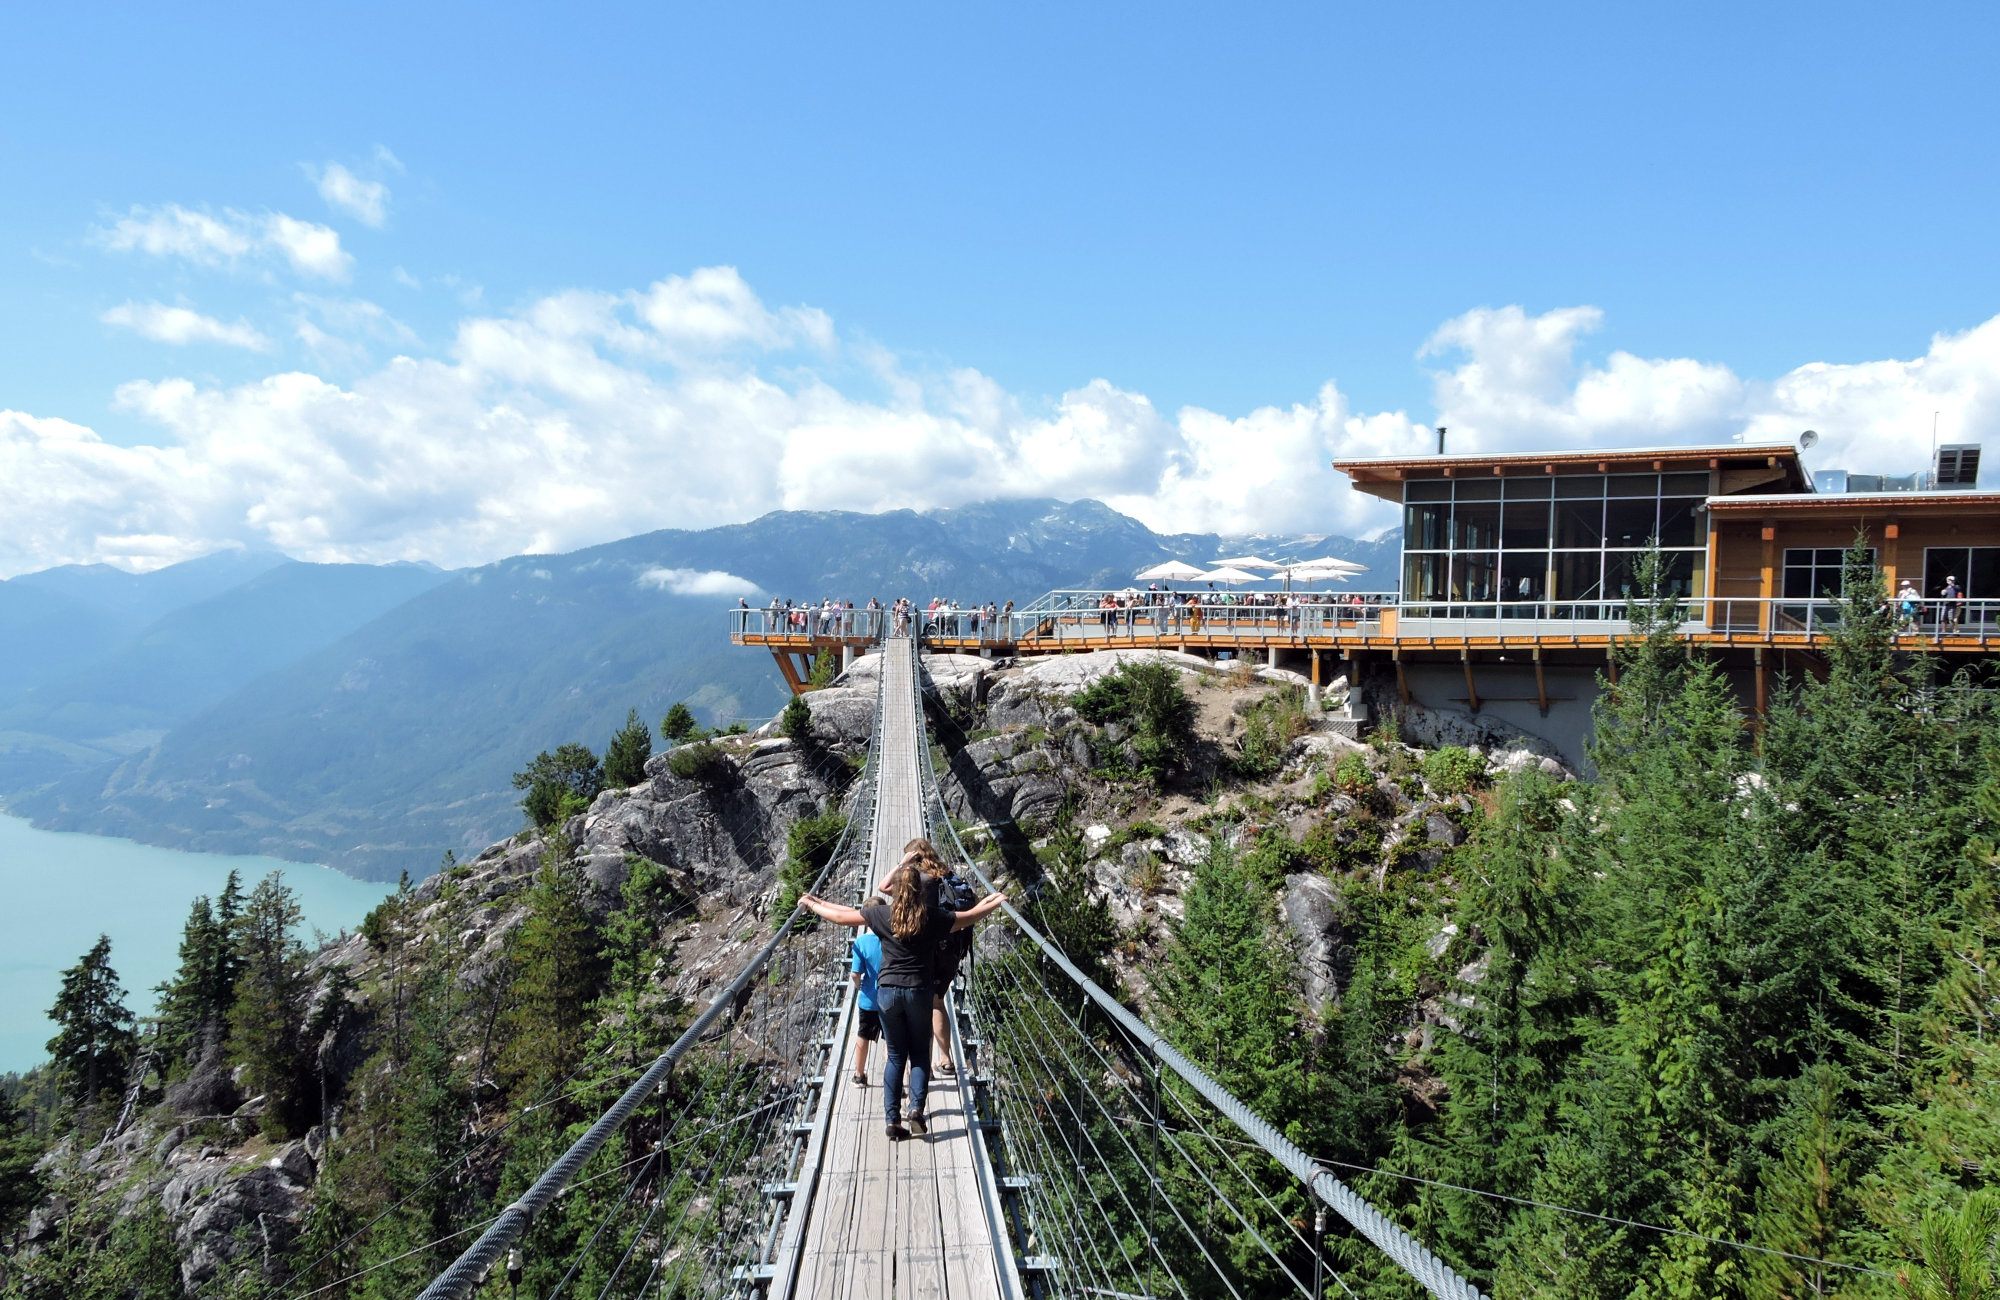 Jaw Dropping Views On The Sea To Sky Gondola - Traveling Islanders